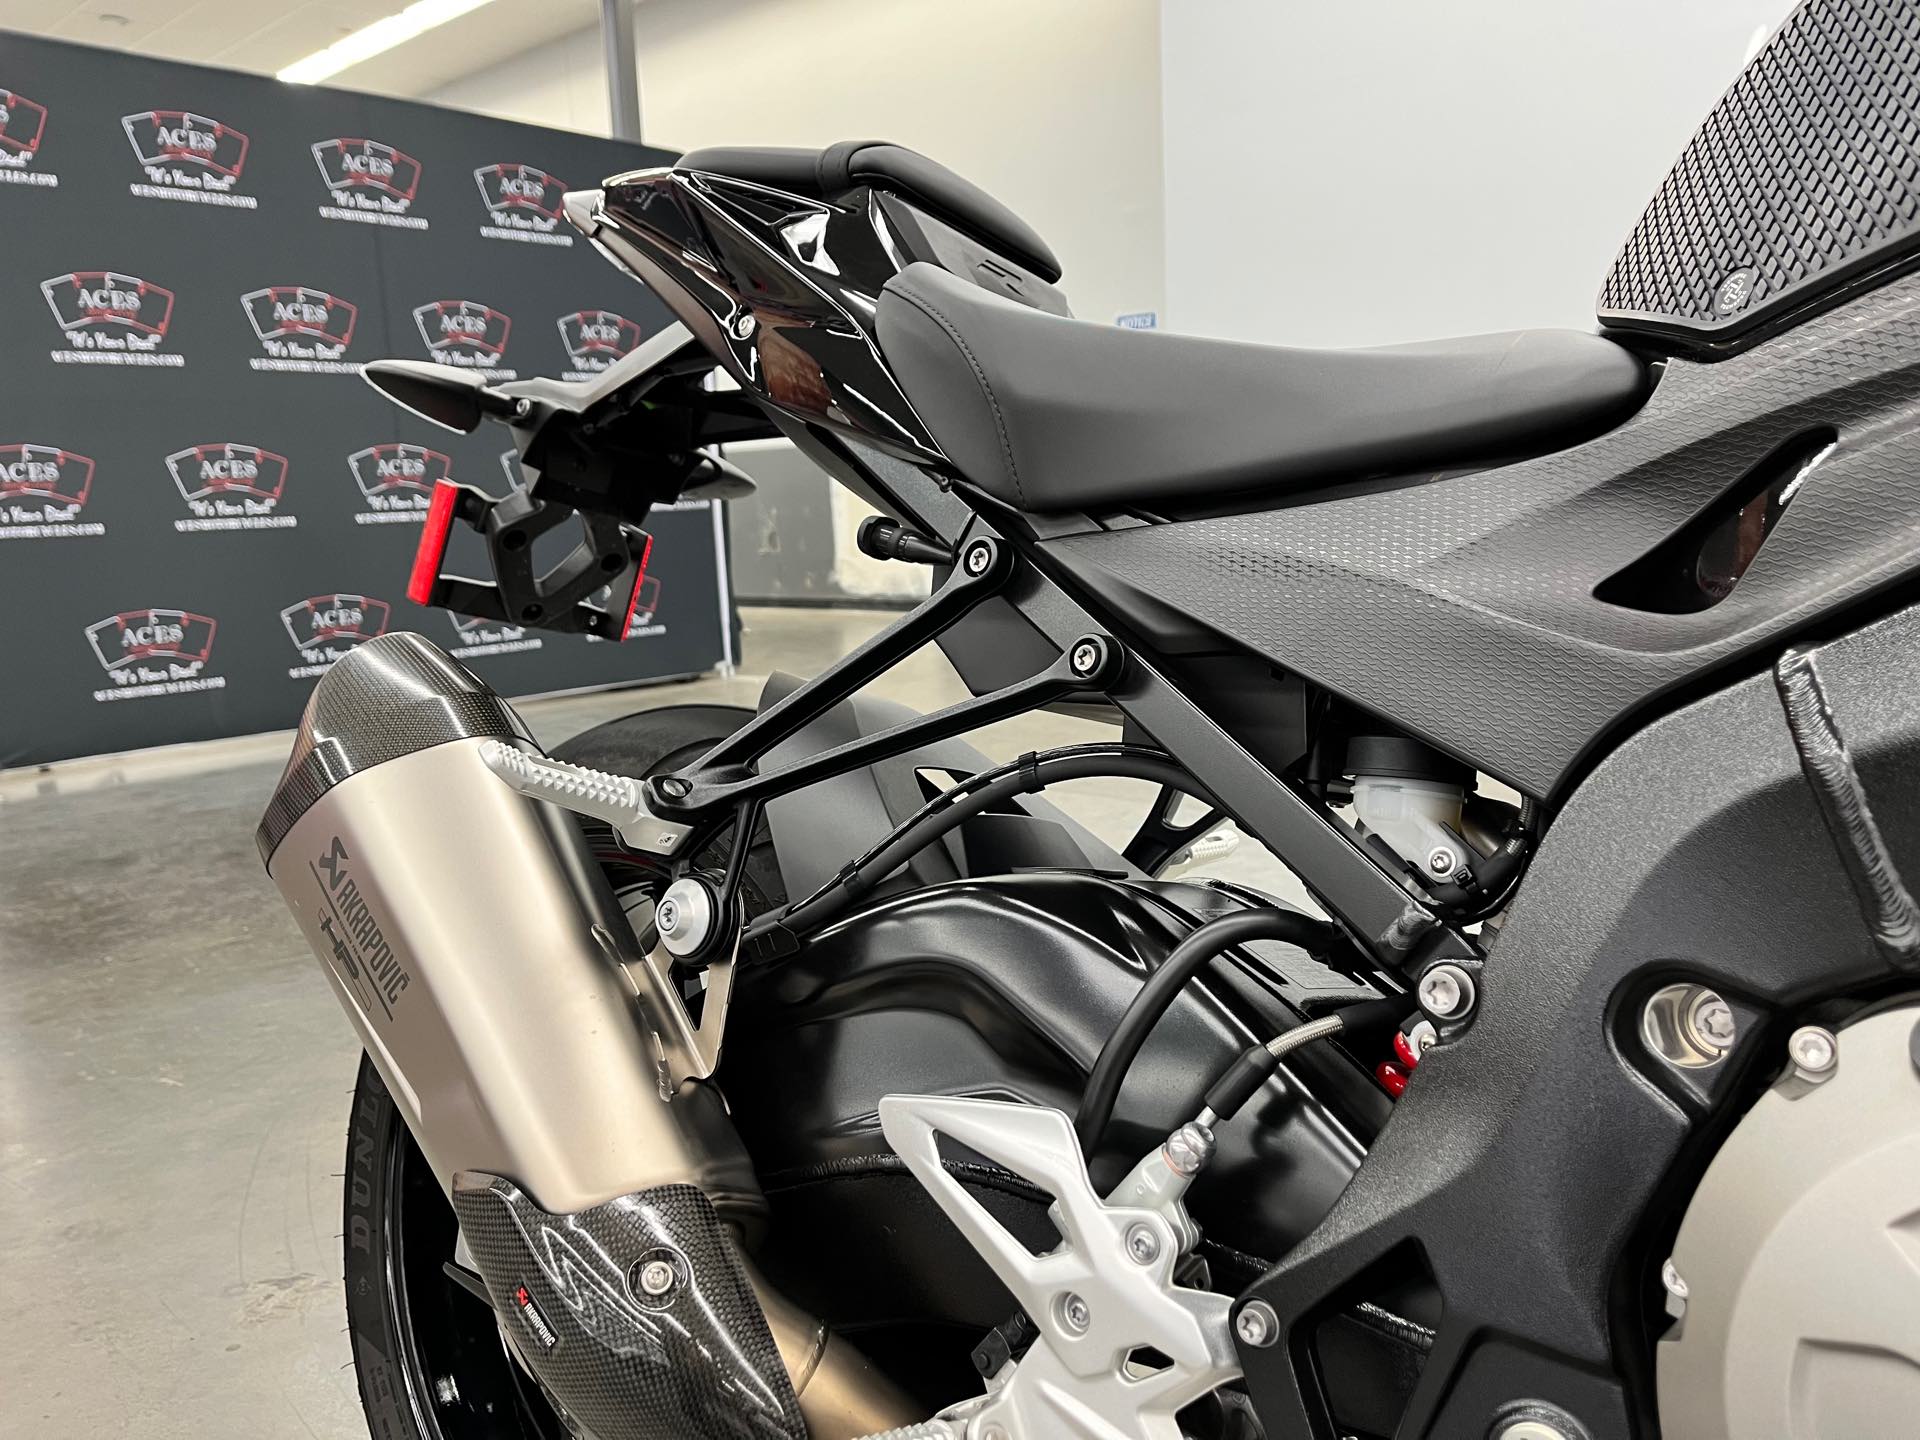 2019 BMW S 1000 R at Aces Motorcycles - Denver